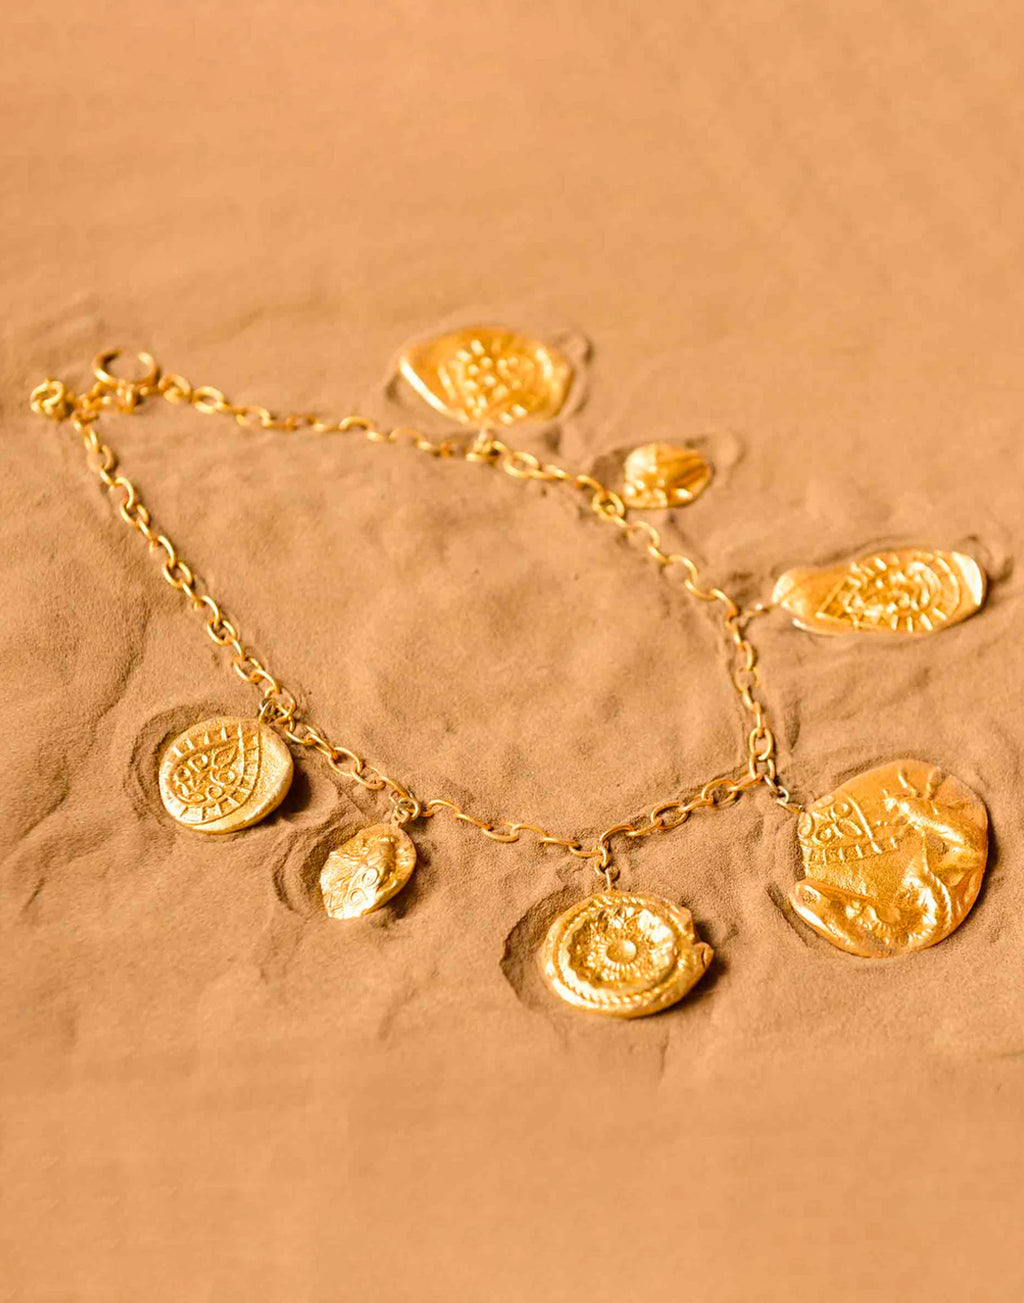 Fossil Charm 3 Necklace - Statement Necklaces - Gold-Plated & Hypoallergenic Jewellery - Made in India - Dubai Jewellery - Dori